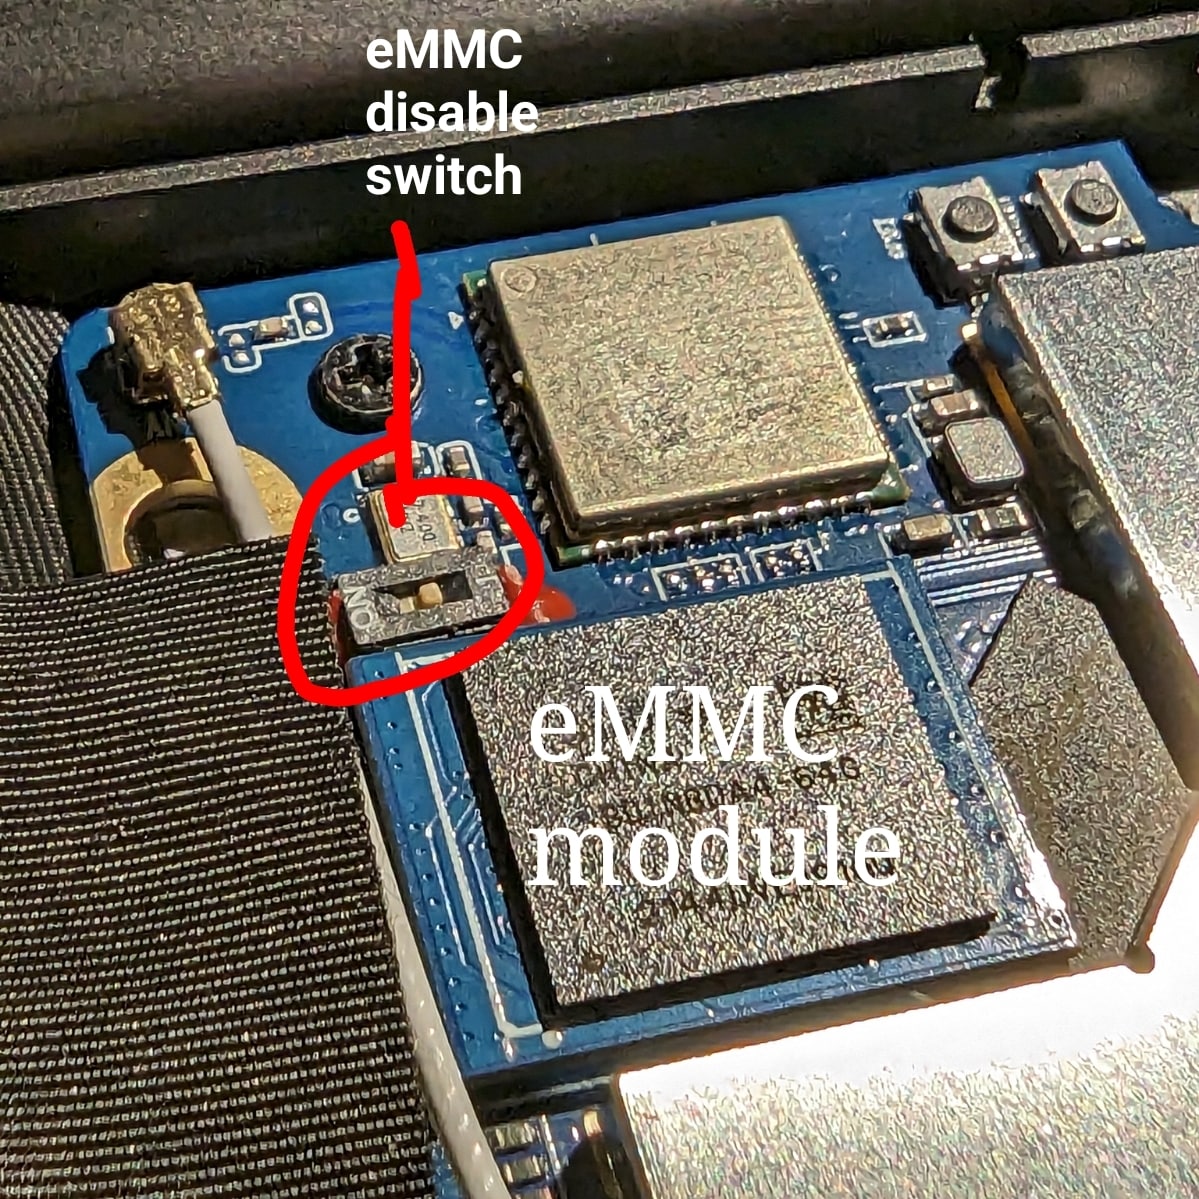 The PineBook Pro eMMC module and switch